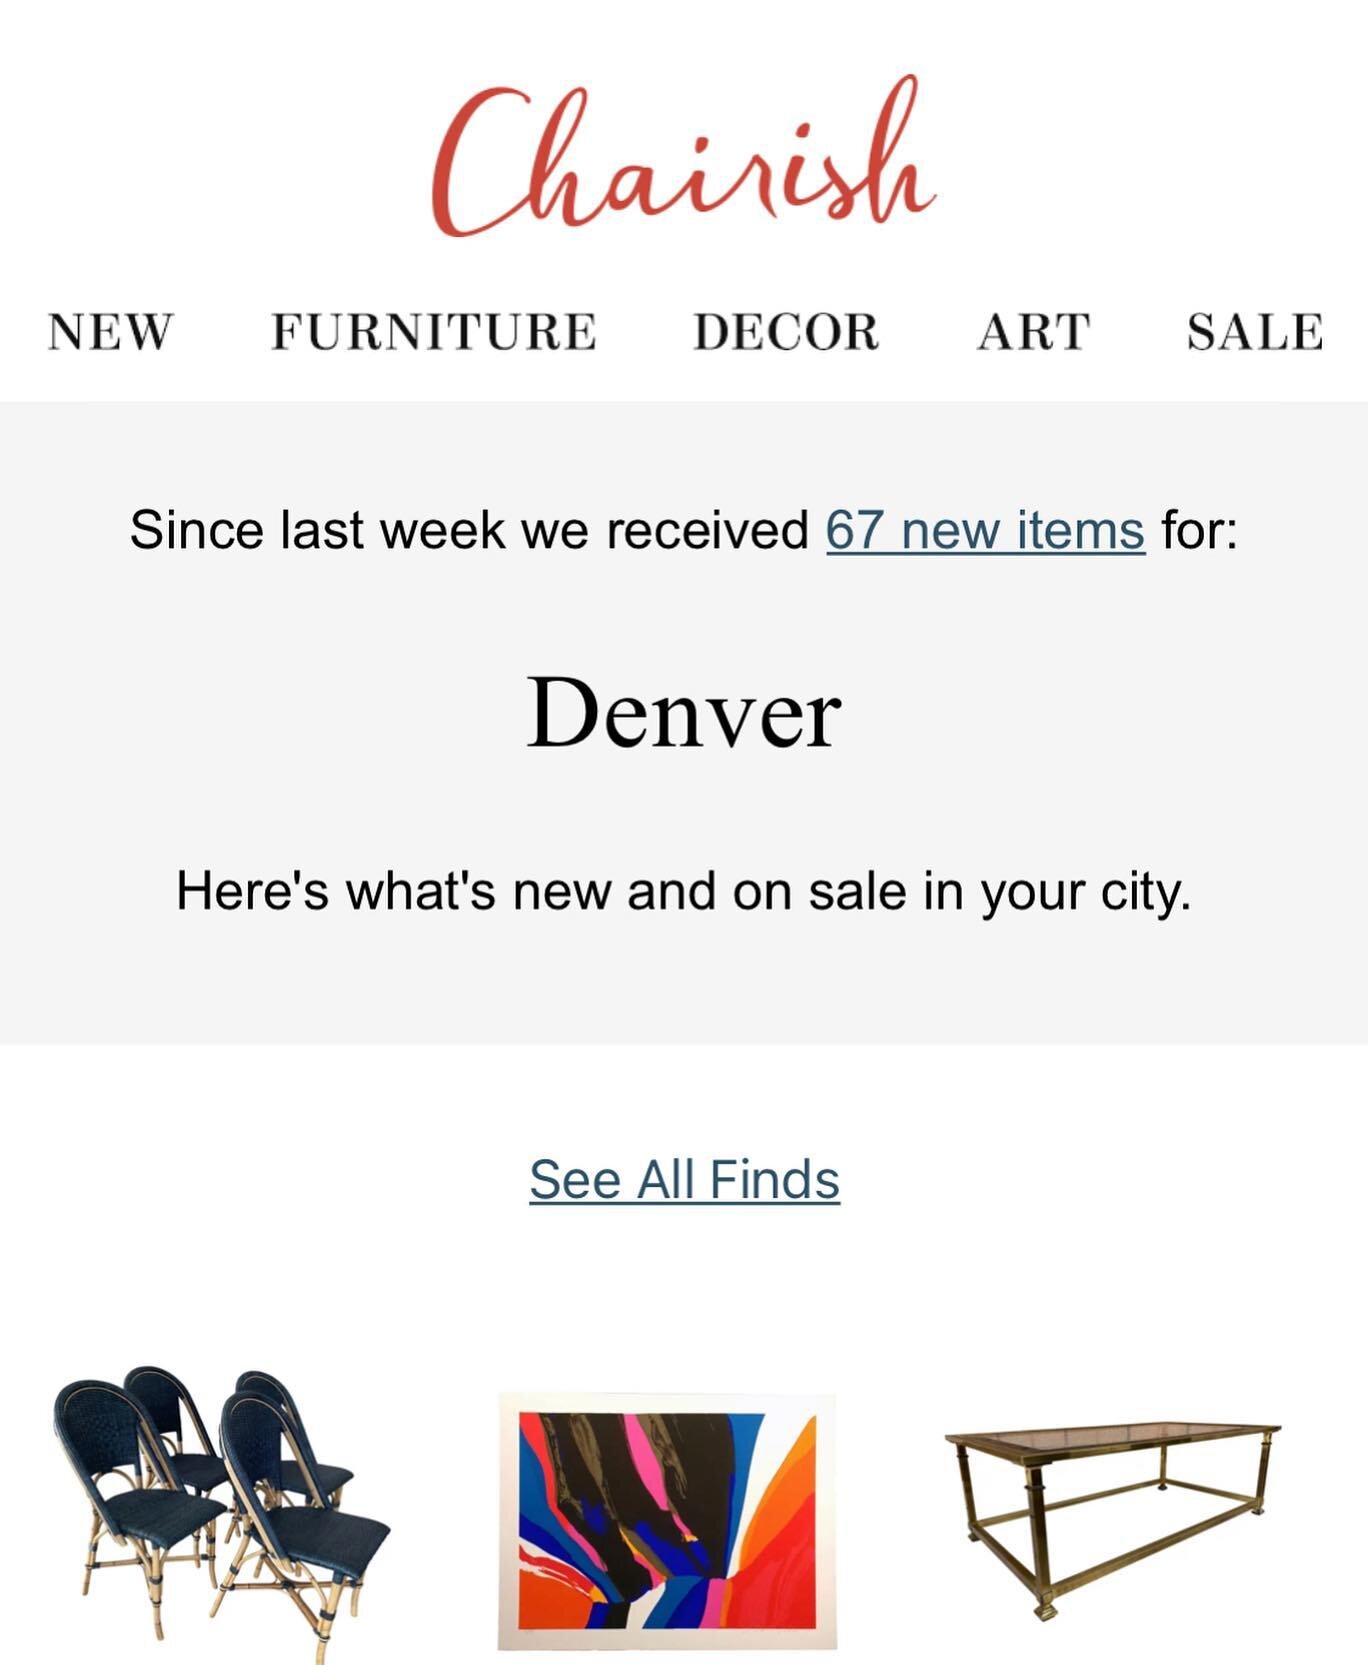 Do you get @chairishco newsletters?!We LOVE that they are tailored to our city; they share LOCAL vintage/antique dealers and their current products available on www.chairish.com! 

Hint: You can save on shipping fees by doing a local pickup! 😉

Grea